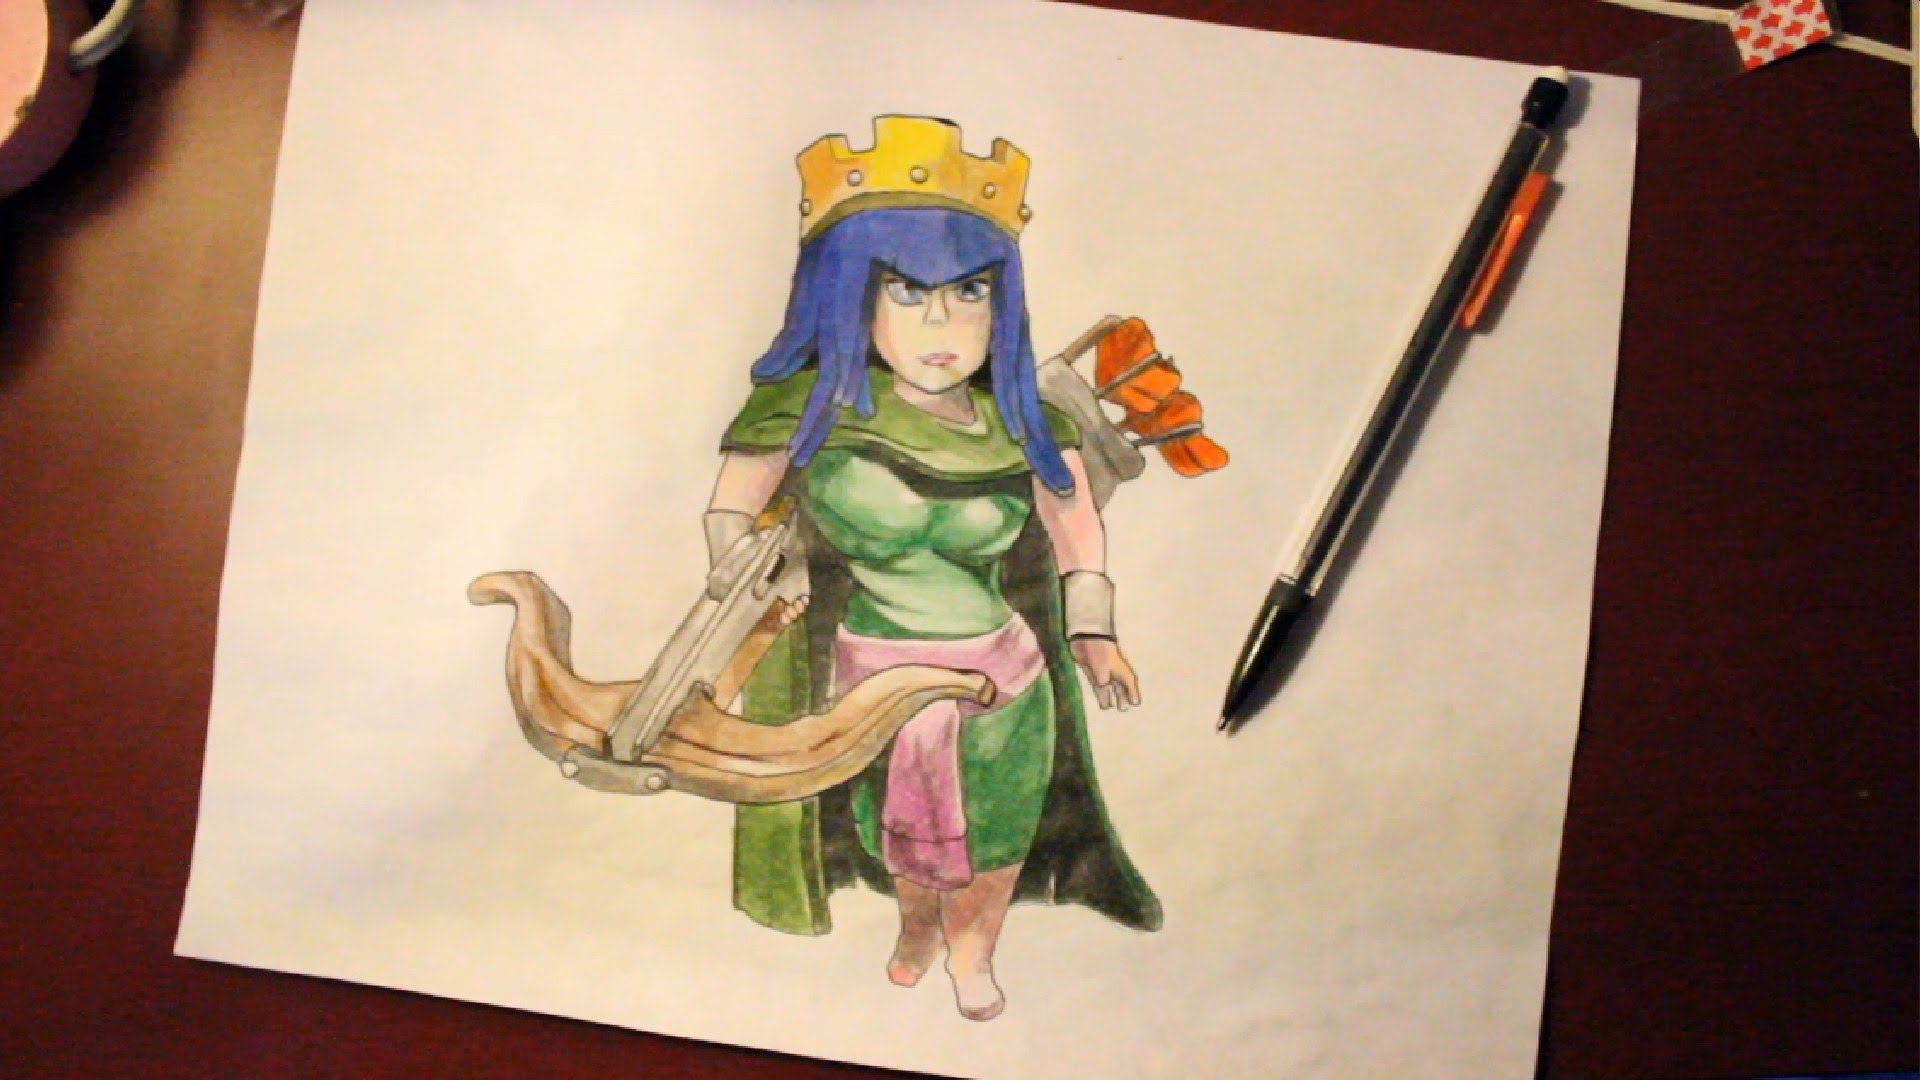 Clash Of Clans Archer Queen Drawing - HD Wallpaper 